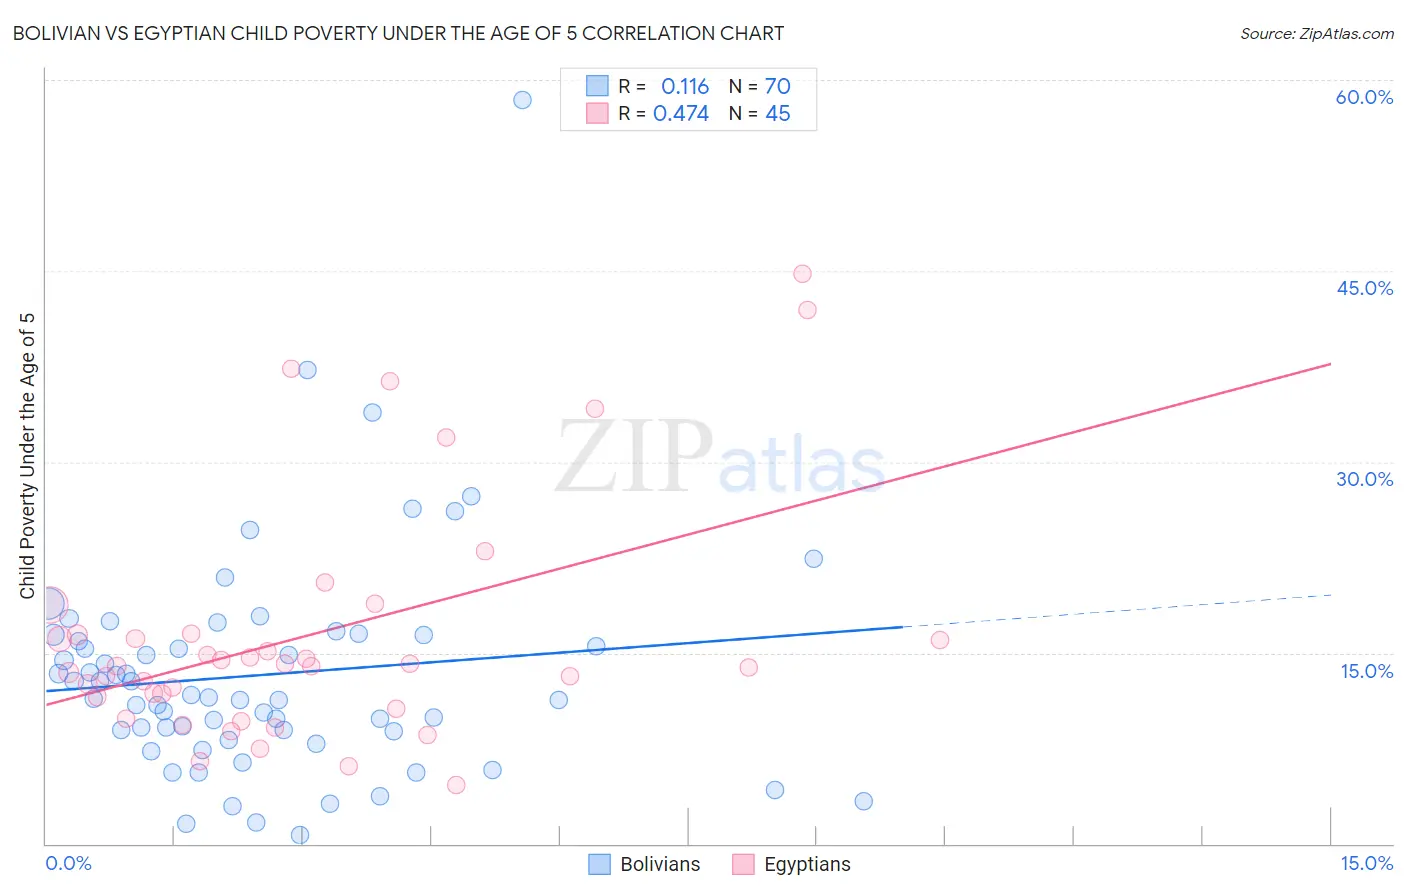 Bolivian vs Egyptian Child Poverty Under the Age of 5